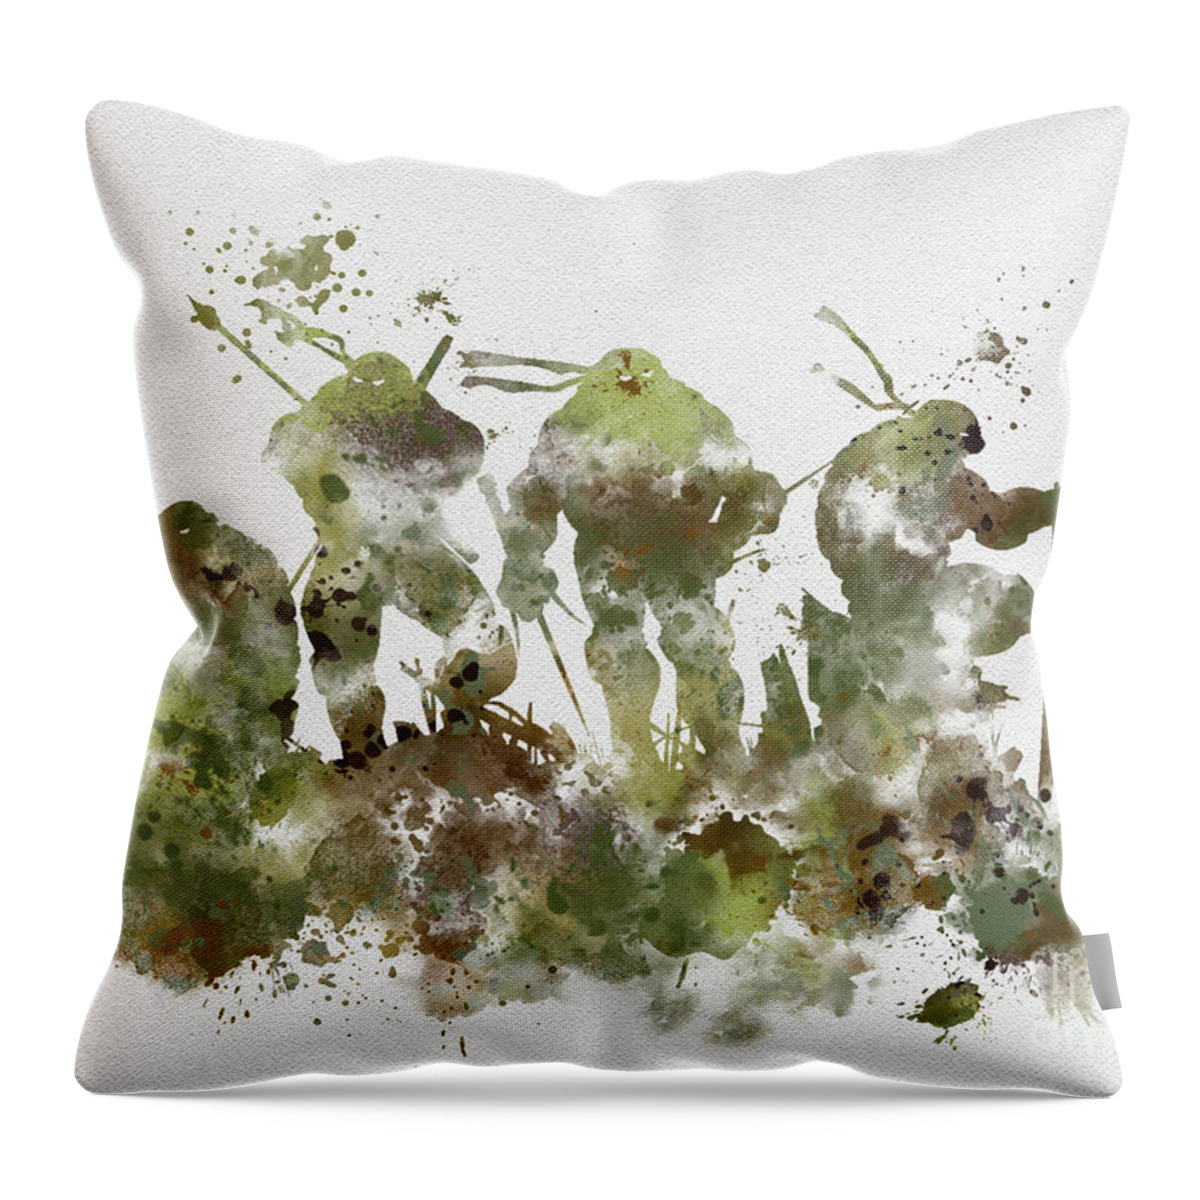 Teenage Mutant Ninja Turtles Throw Pillow featuring the mixed media Tmnt by My Inspiration